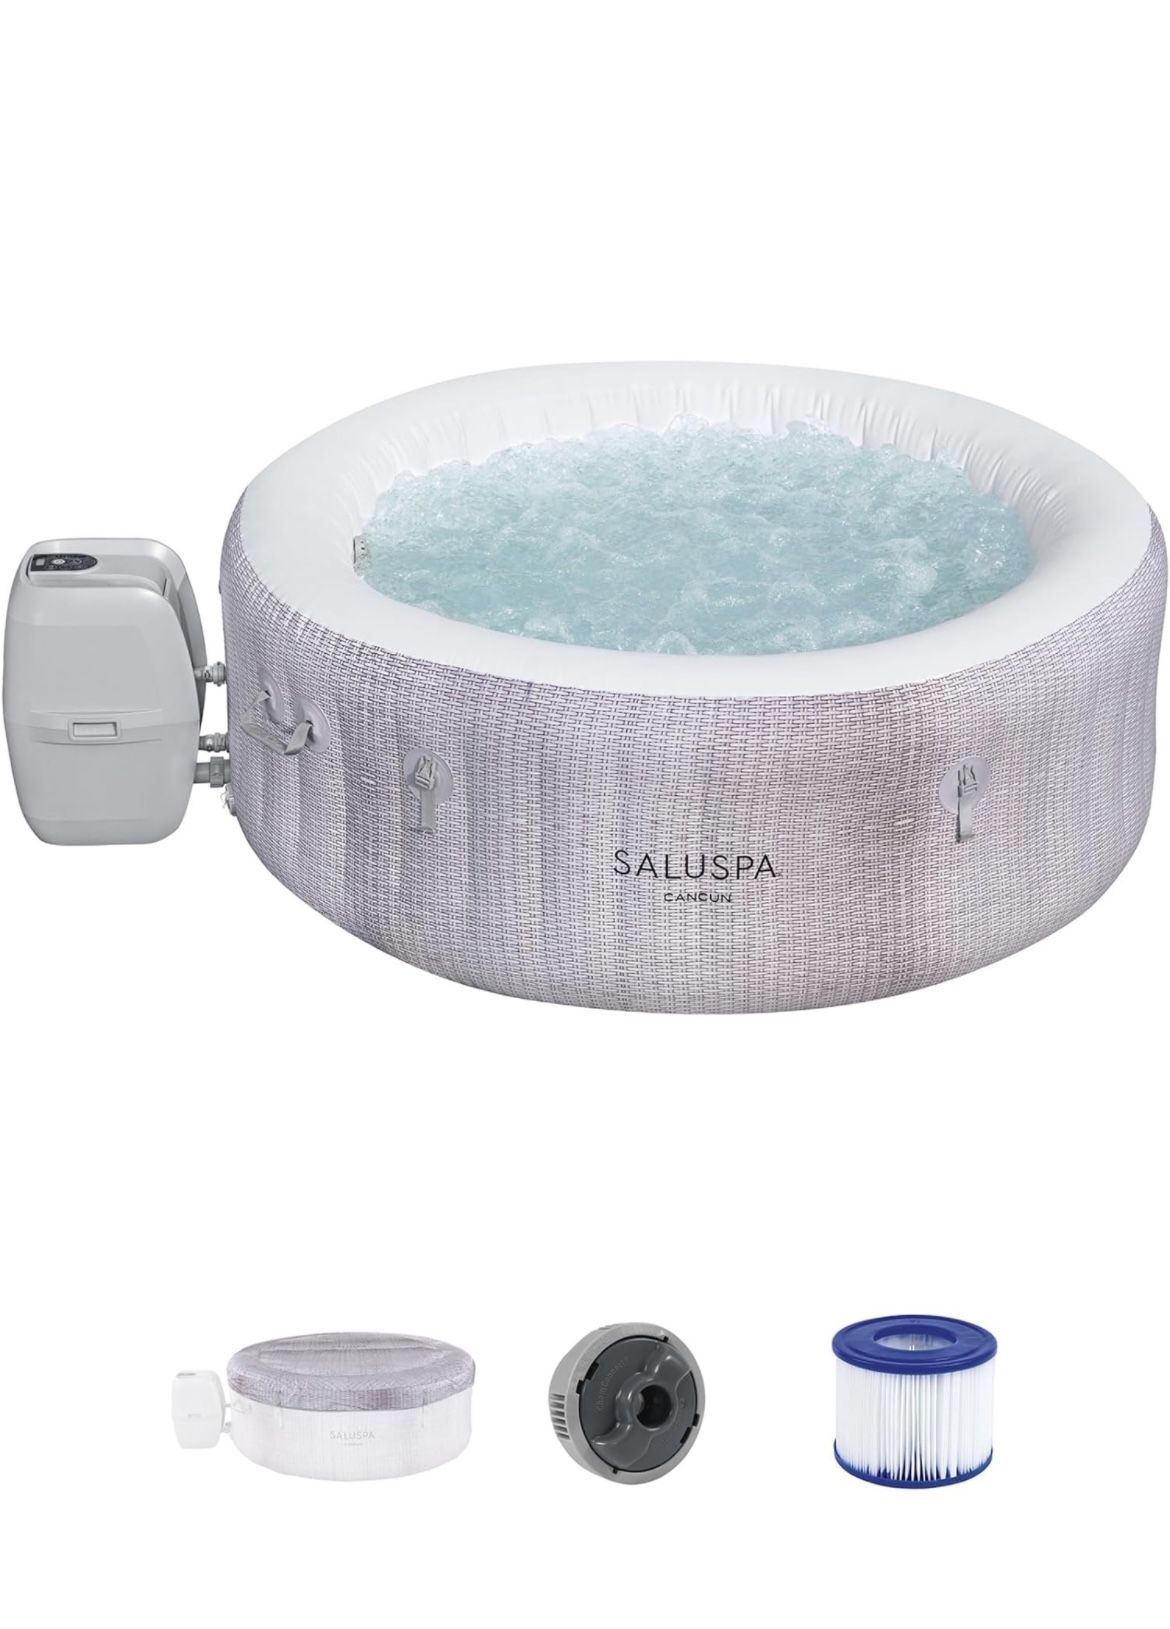 Saluspa Hot Tub (In Box Completely Brand New)